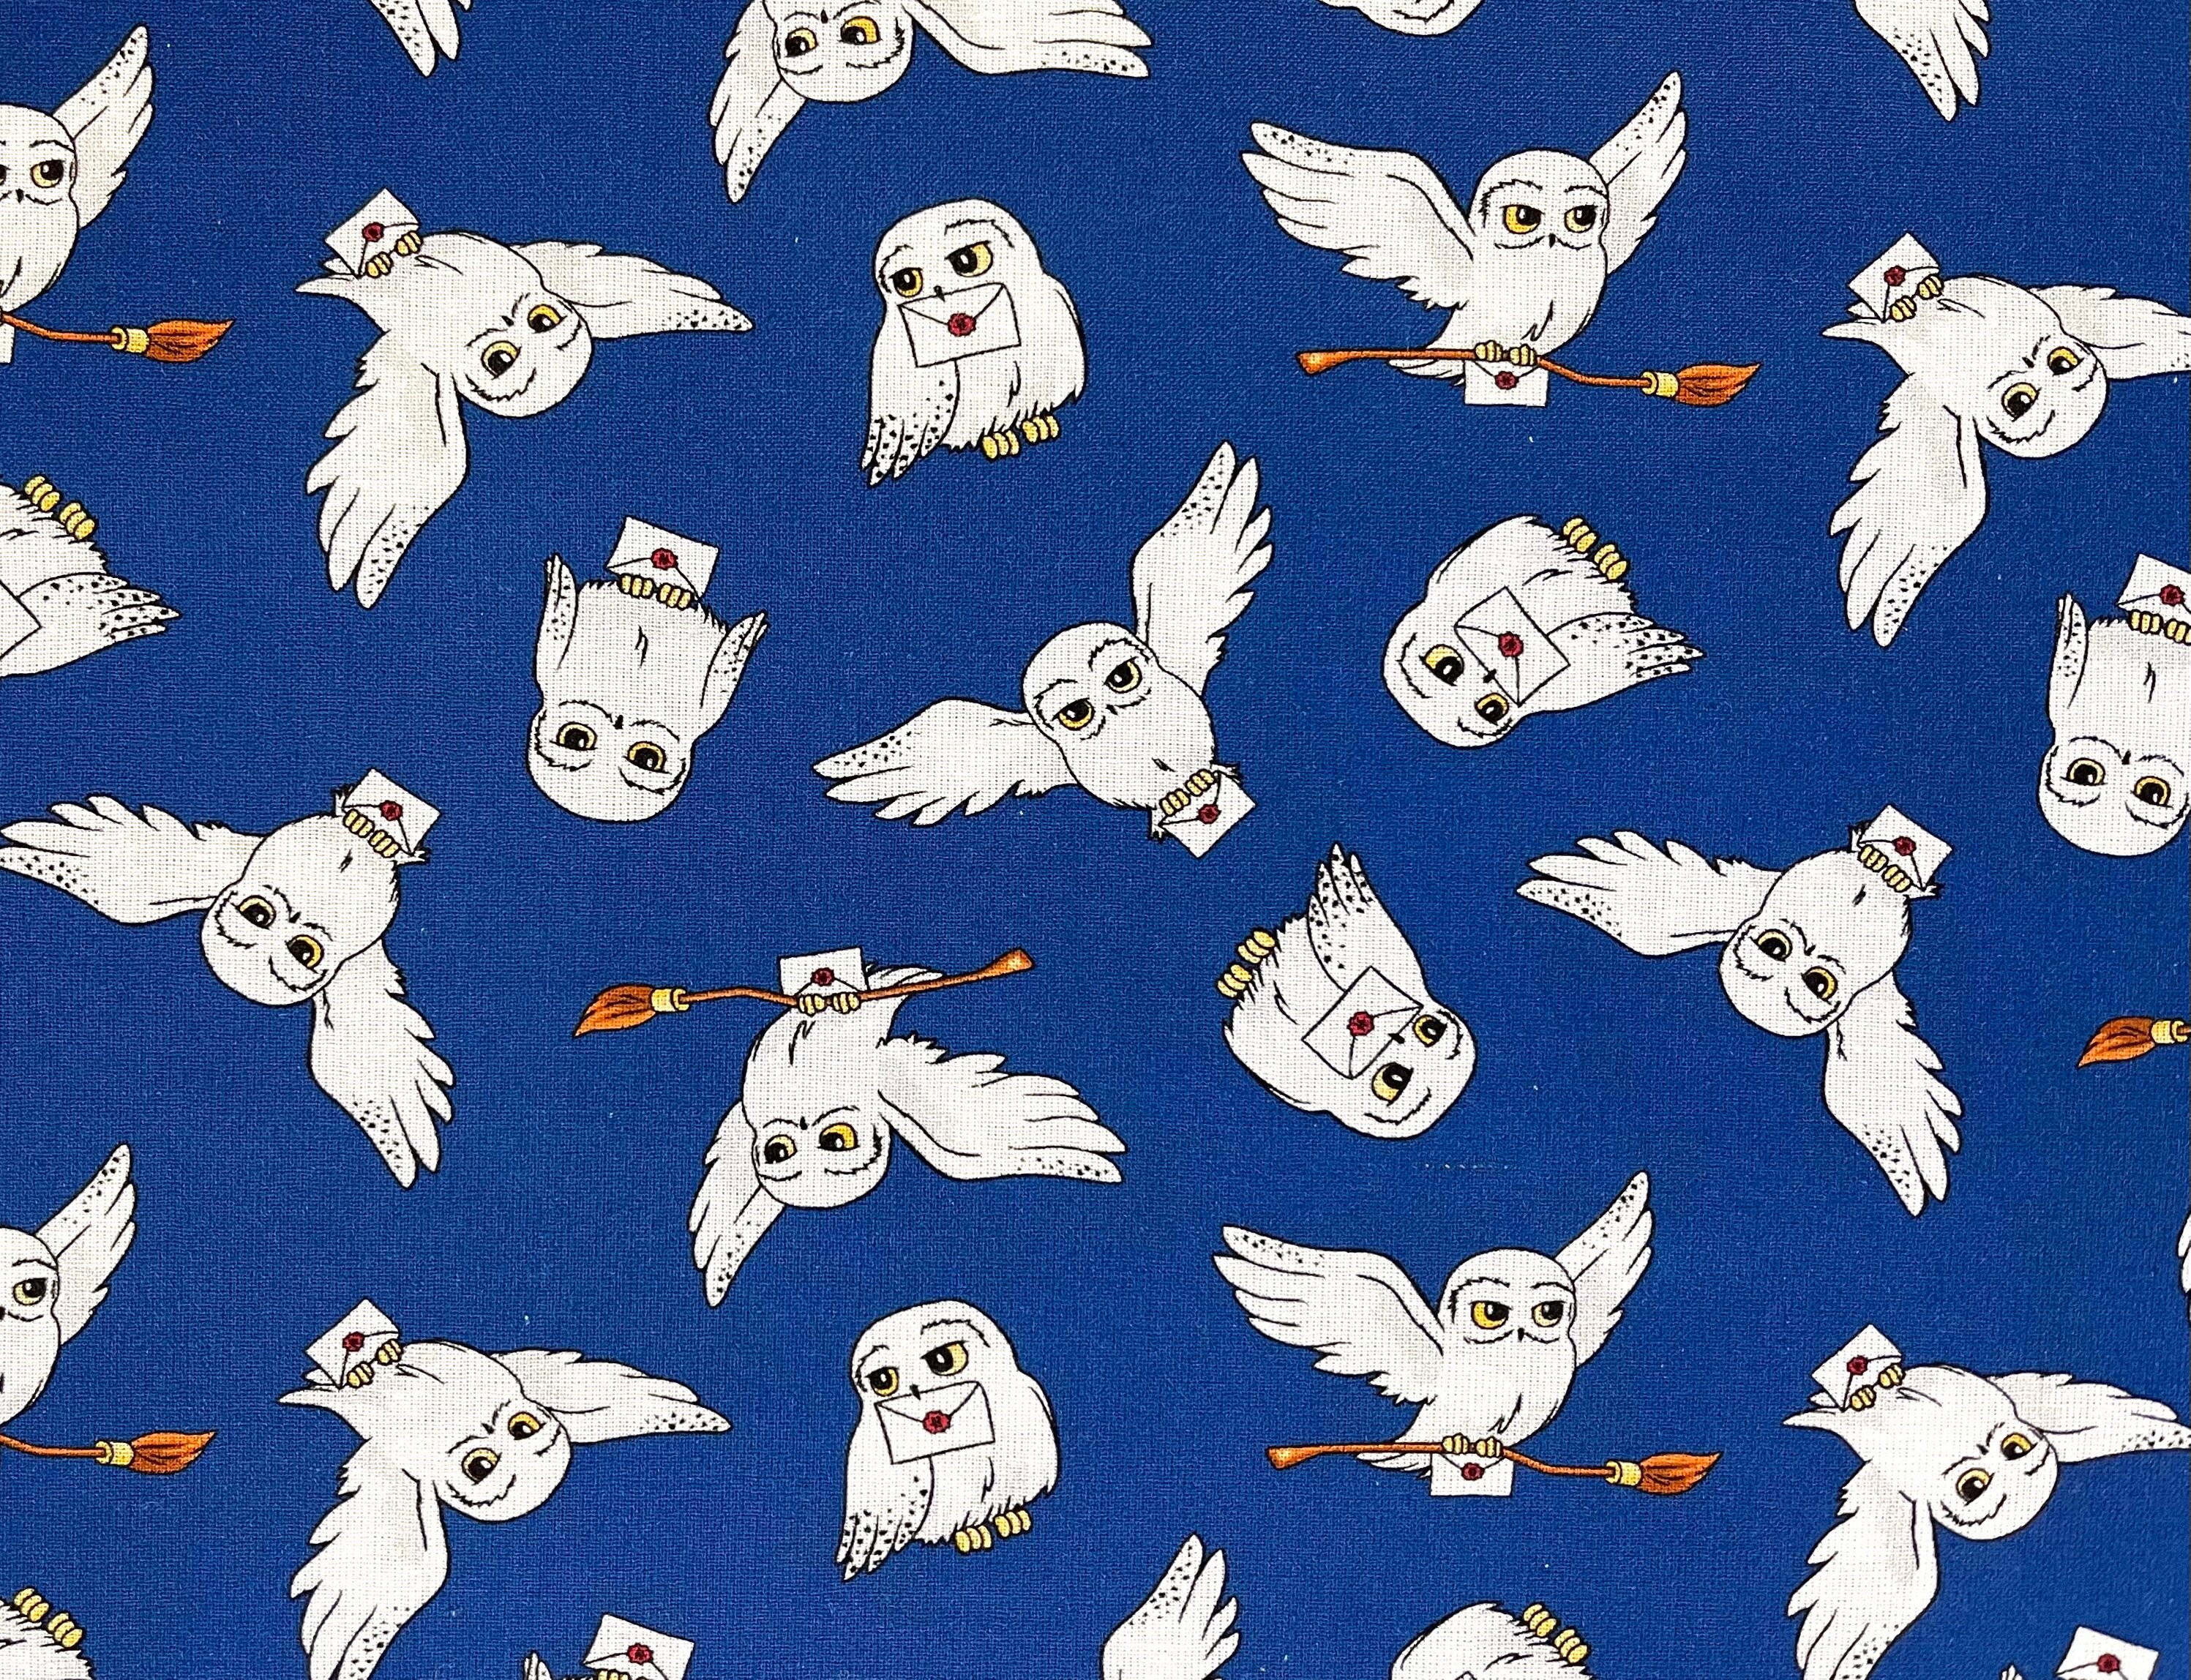 Owls Sewing Fabric by the 1/2 yard looks like Hedwig in Harry Potter movies